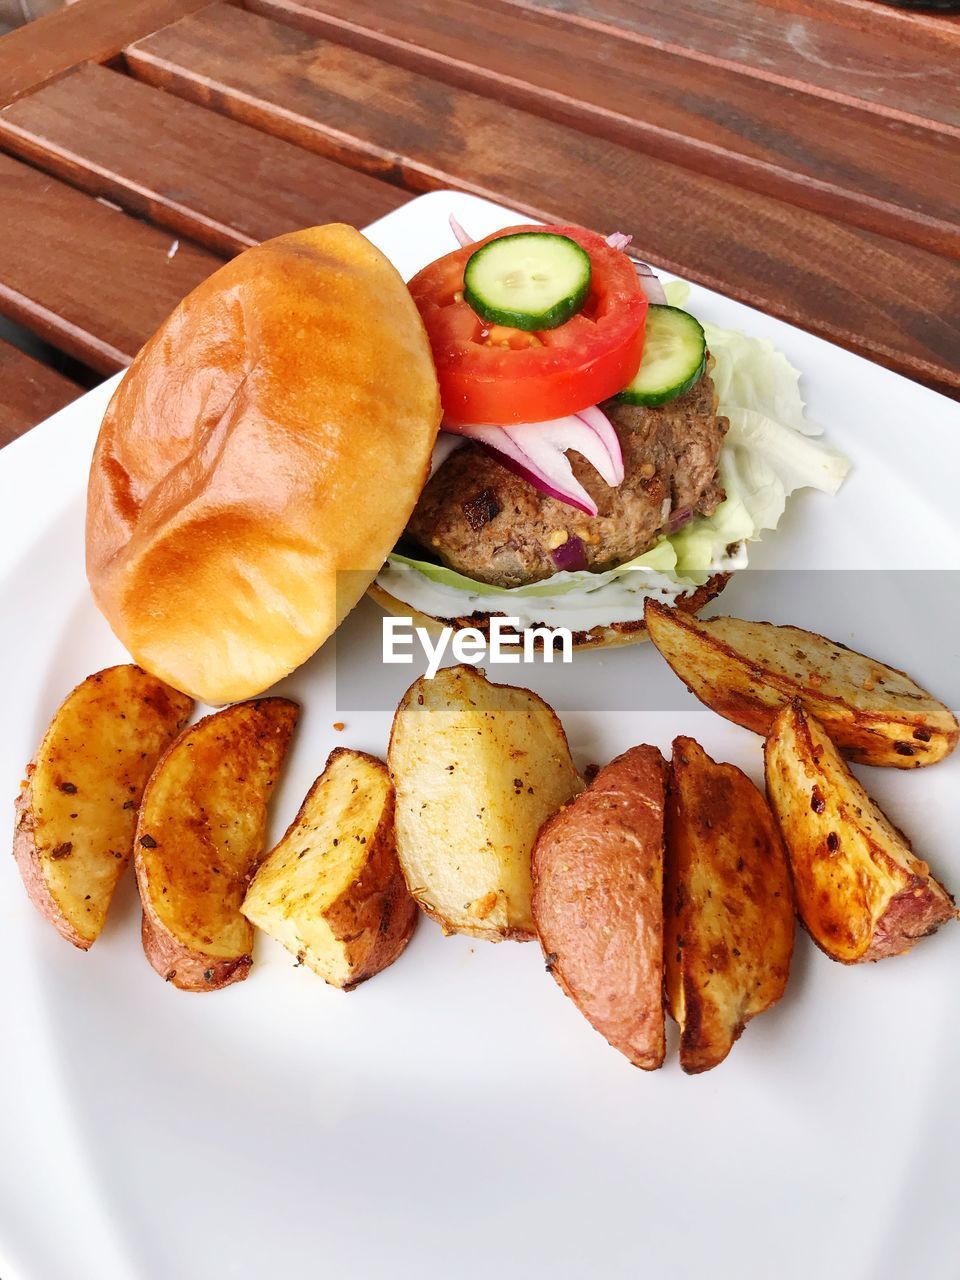 Homemade burger on plate with baked potato fries